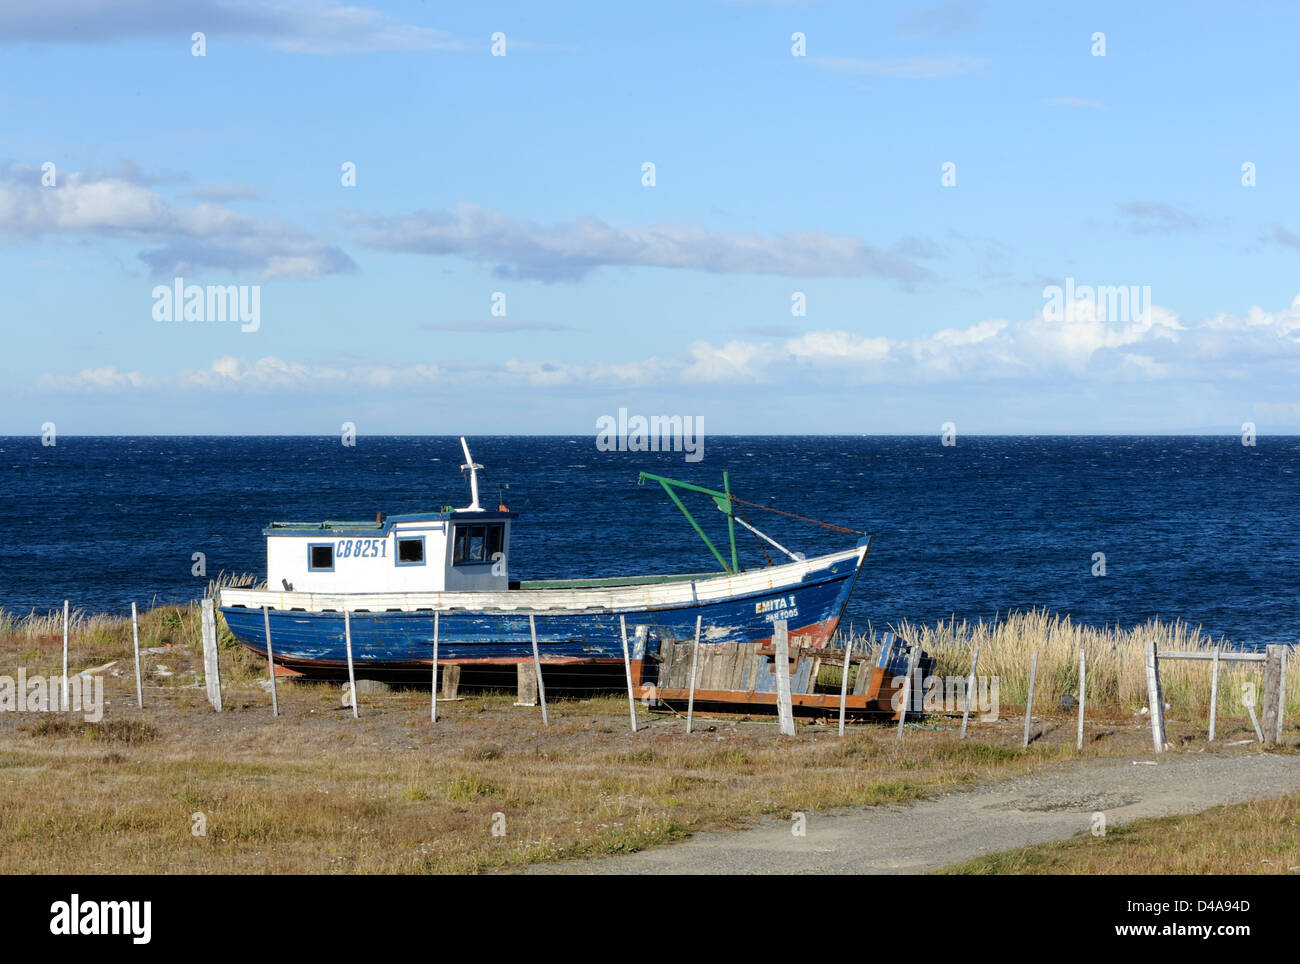 Old wooden fishing boat pulled up above the beach on the Strait of Magellan .  Punta Arenas, Chile. Stock Photo